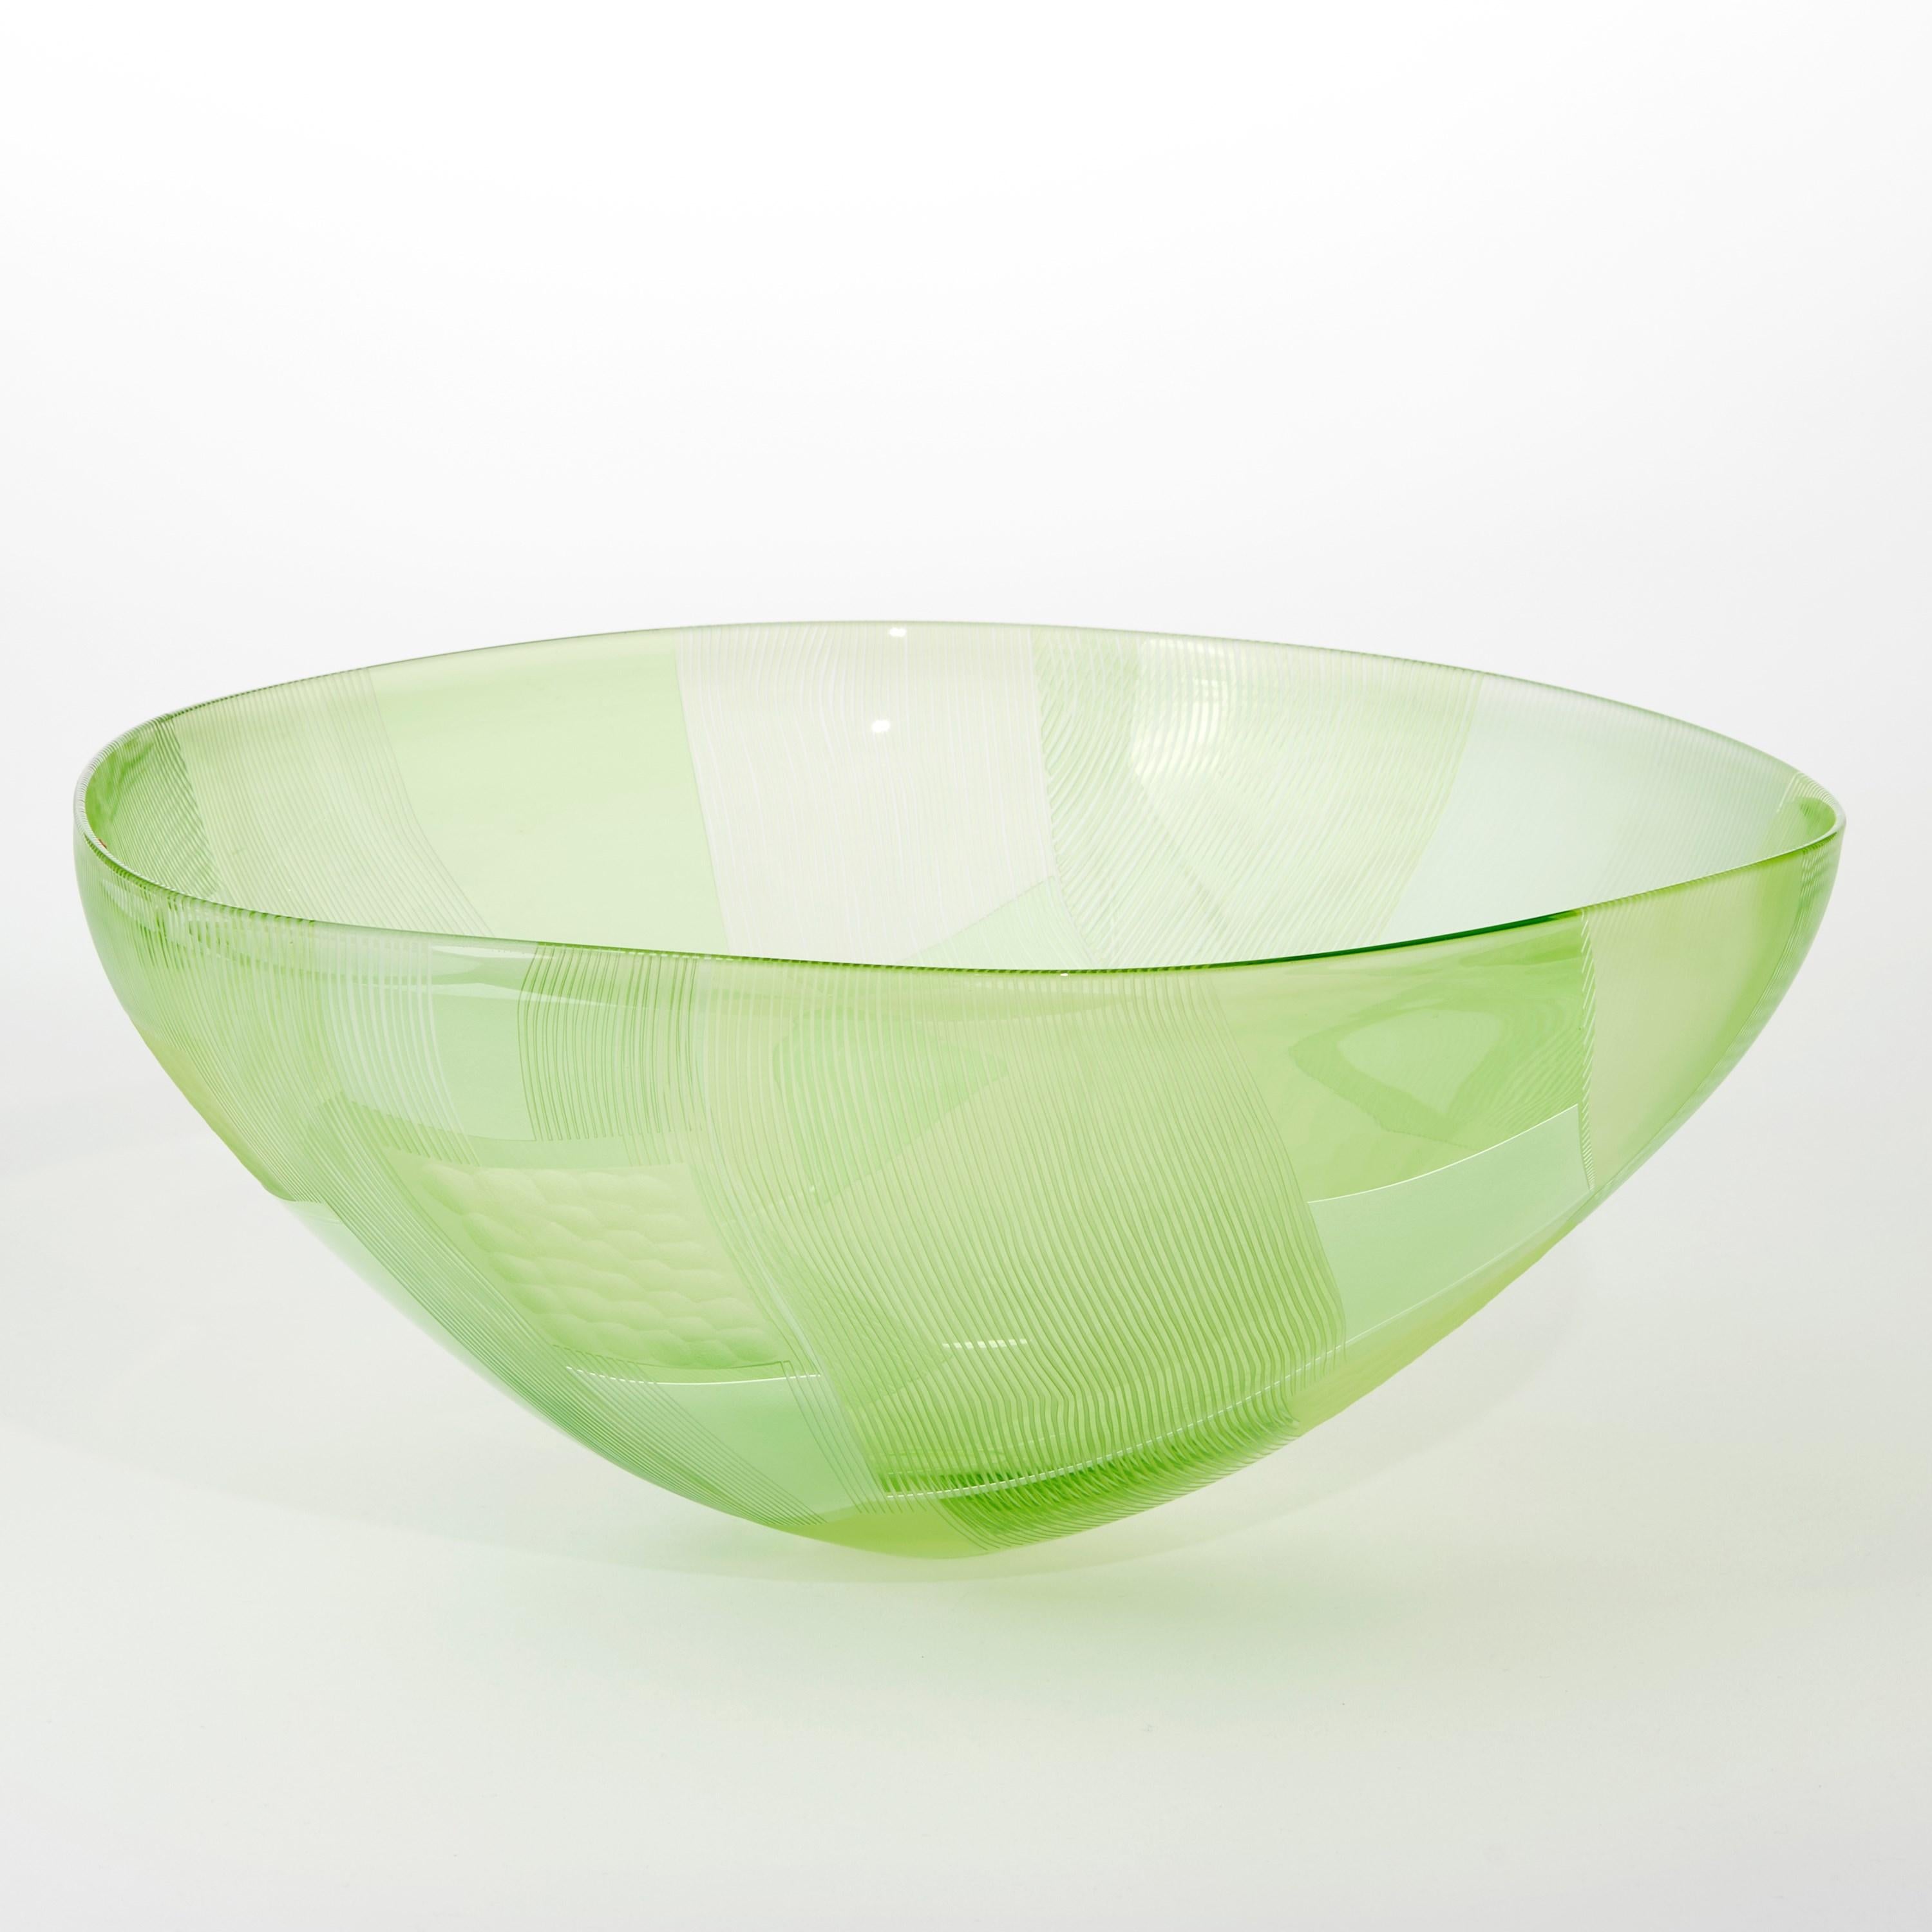 'Abstracted Land Moss Green over Spring Green' is a unique handblown and cut glass artwork by the British artist, Kate Jones of Gillies Jones.

In the artist's own words:

“This new body of work references both the evident structure of the landscape